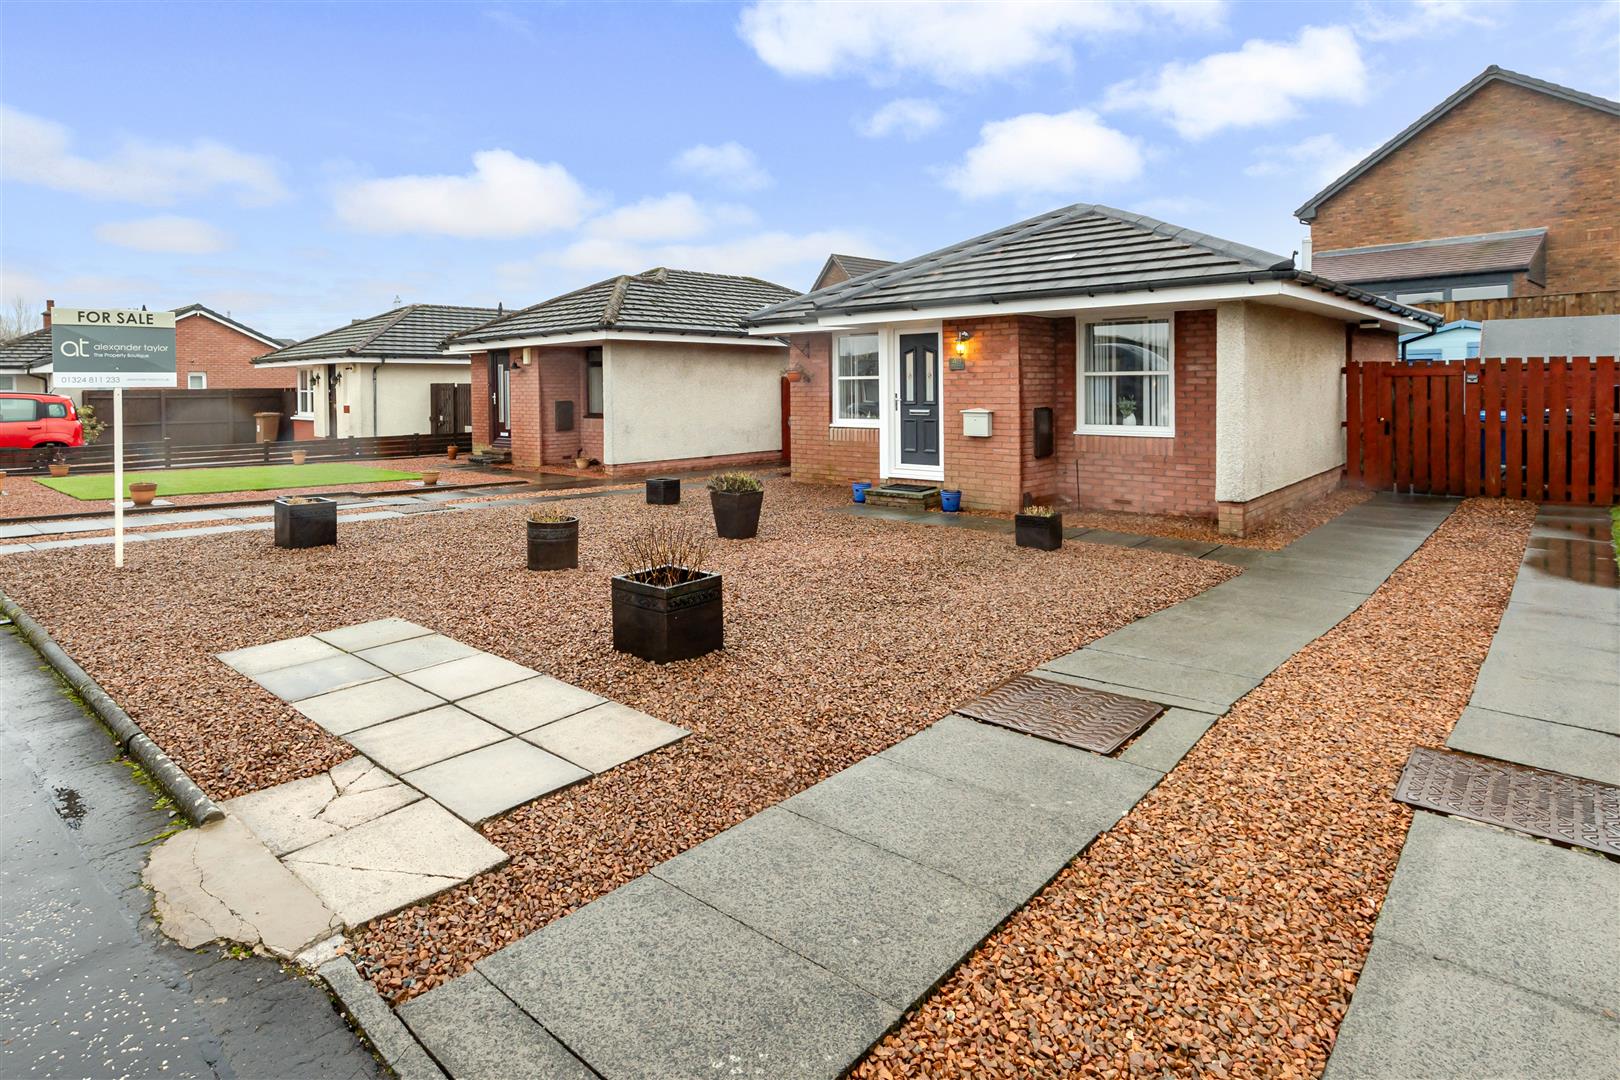 2 bed detached bungalow for sale in Chambers Drive, Falkirk, FK2 